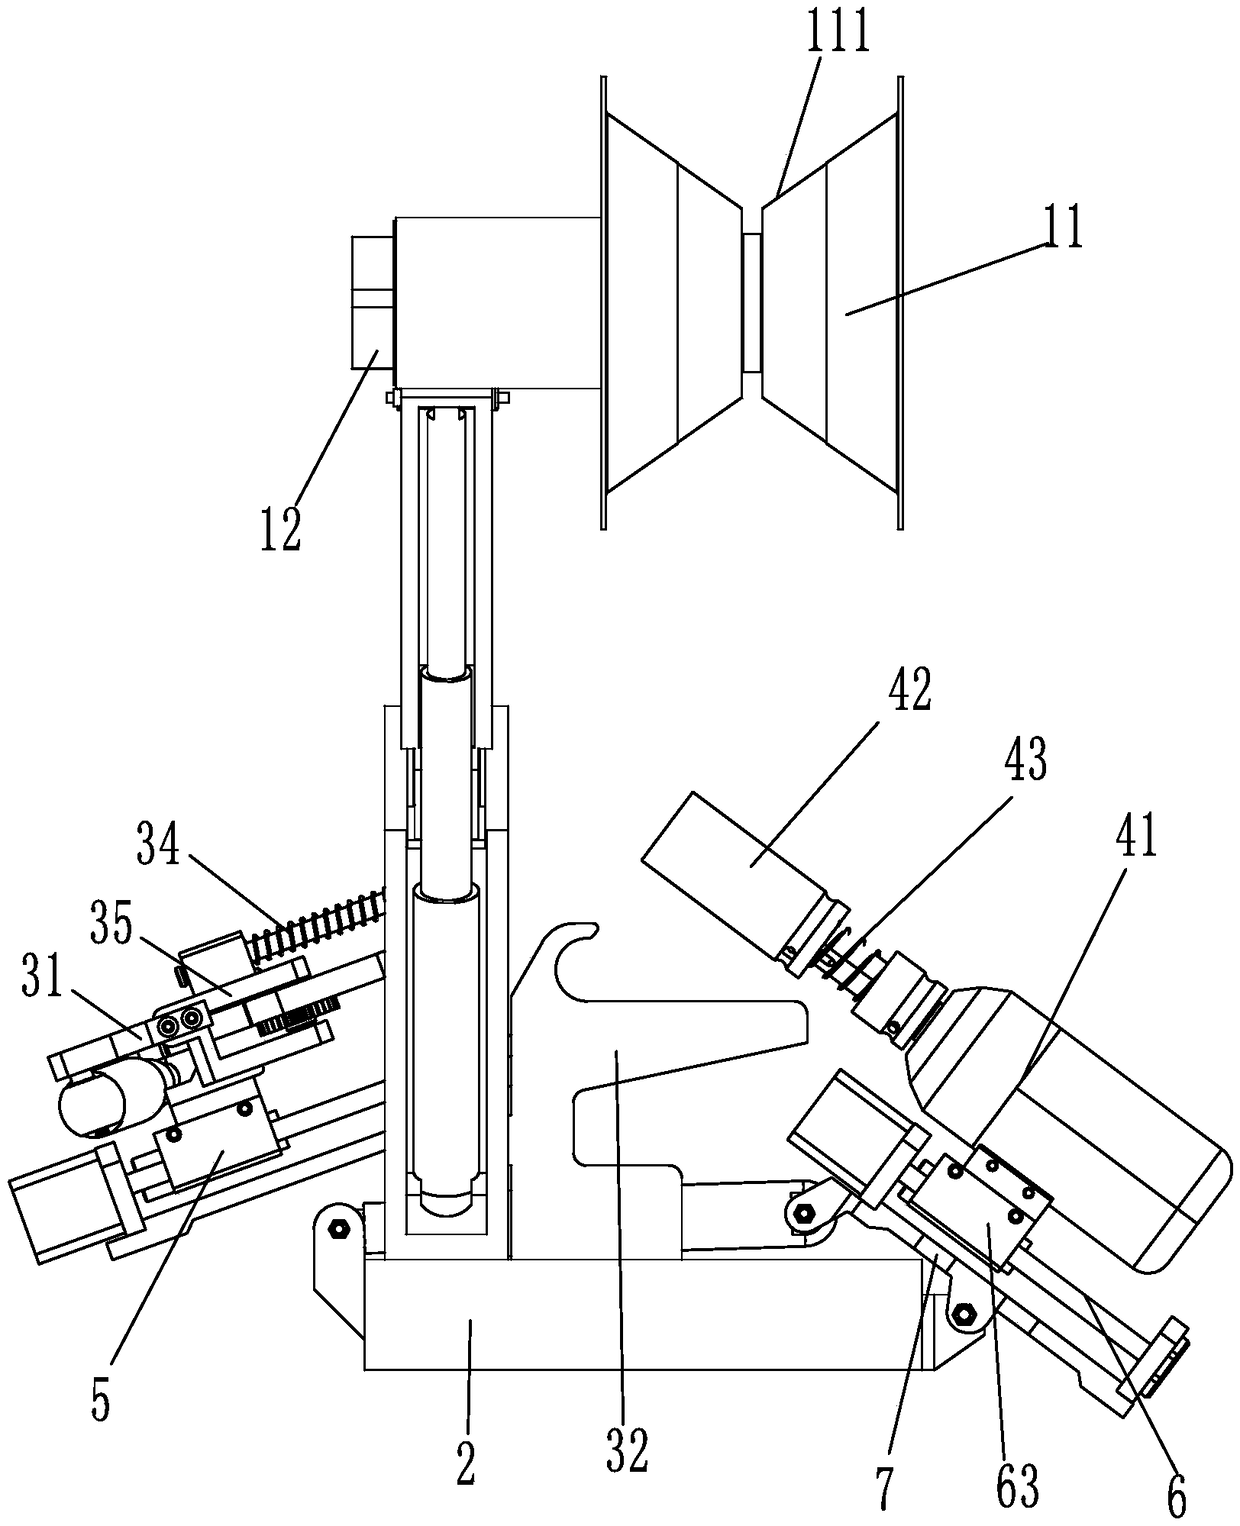 Sea horse type vibration damper assembling and disassembling device and method